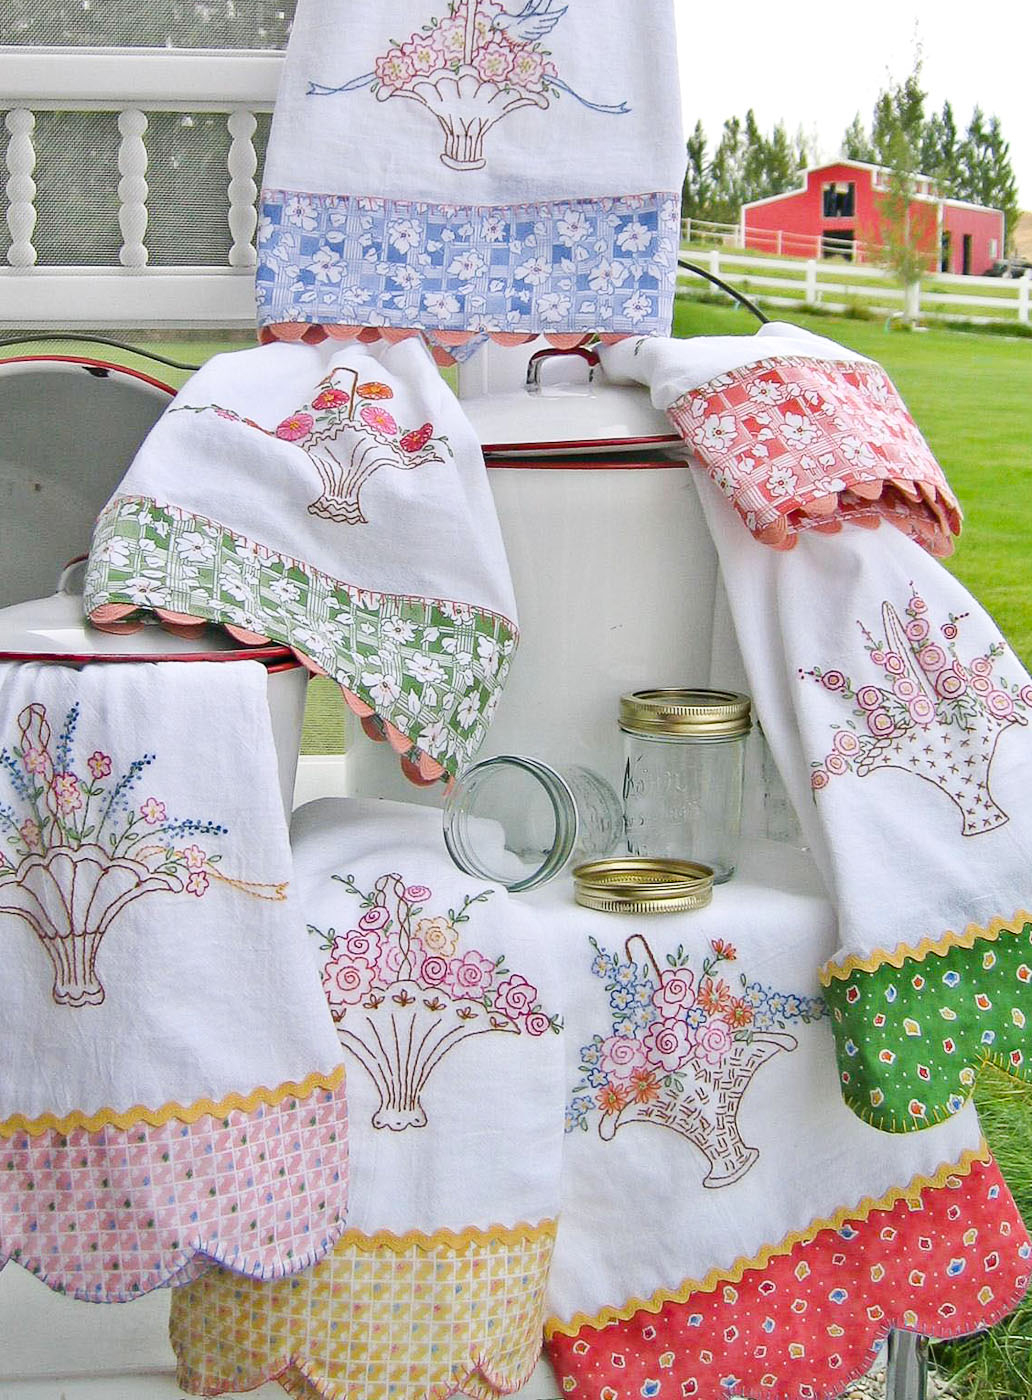 Kitchen Towel Embroidery Patterns Hand Embroidery Pattern Grandmas Tea Towels